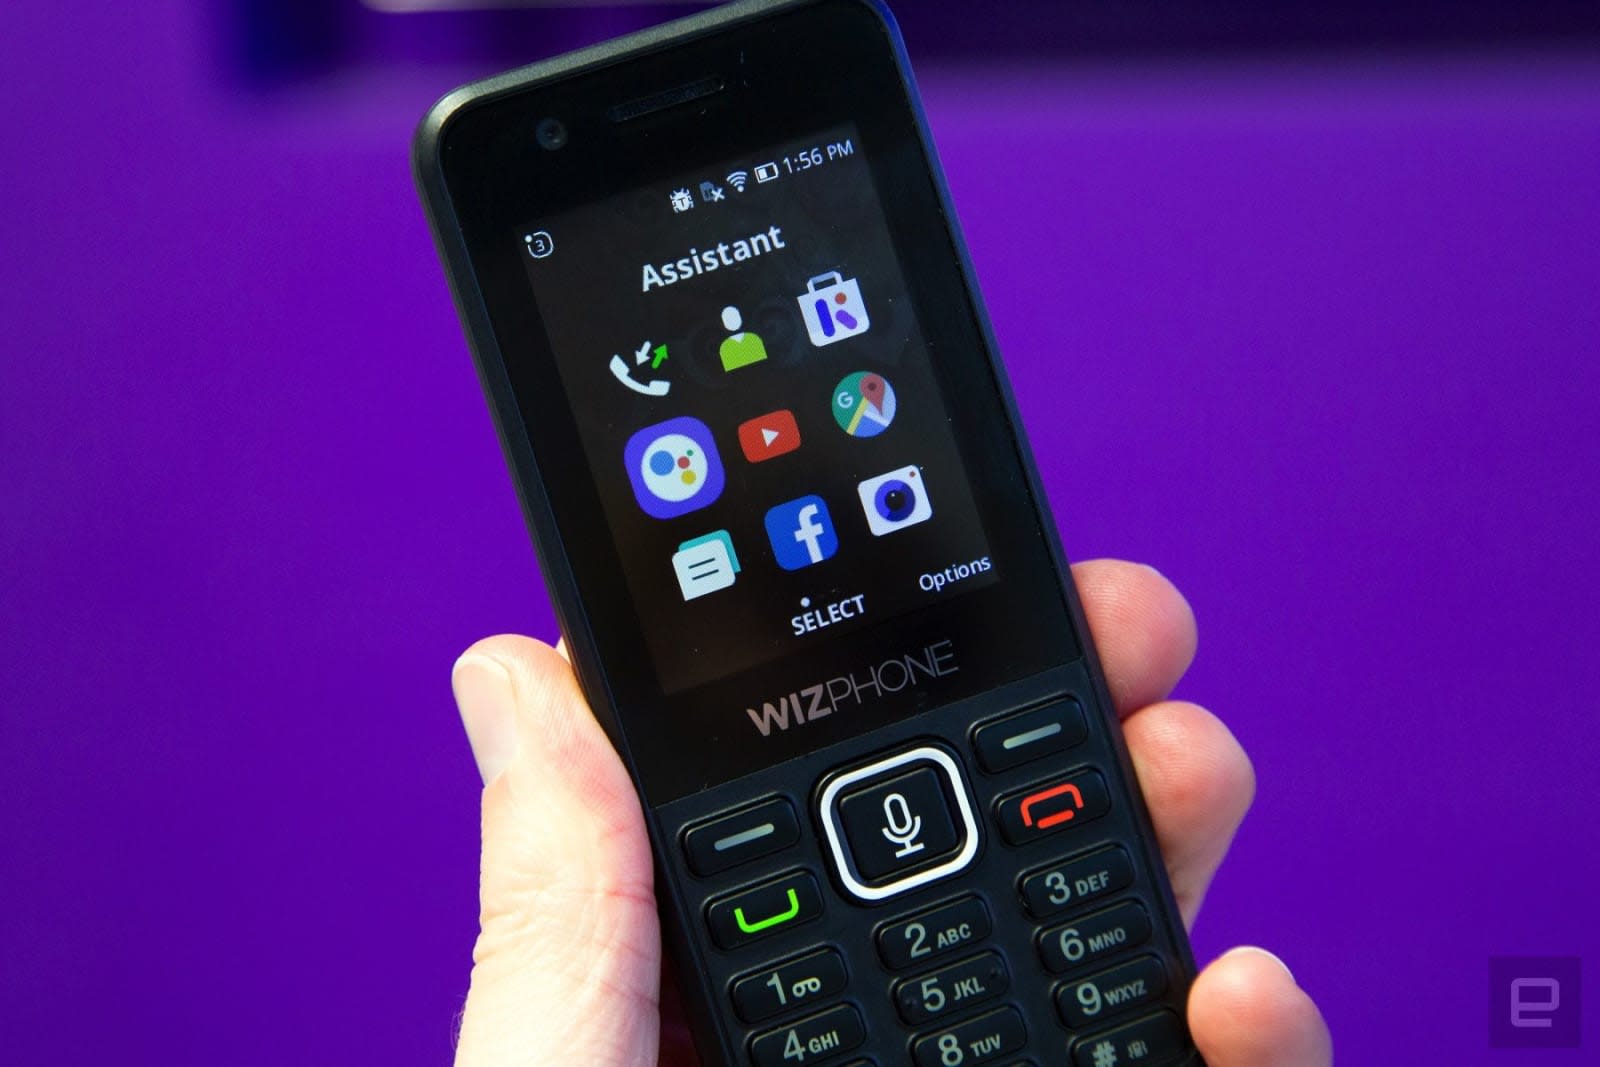 WhatsApp comes to millions of basic cellphones running KaiOS ...